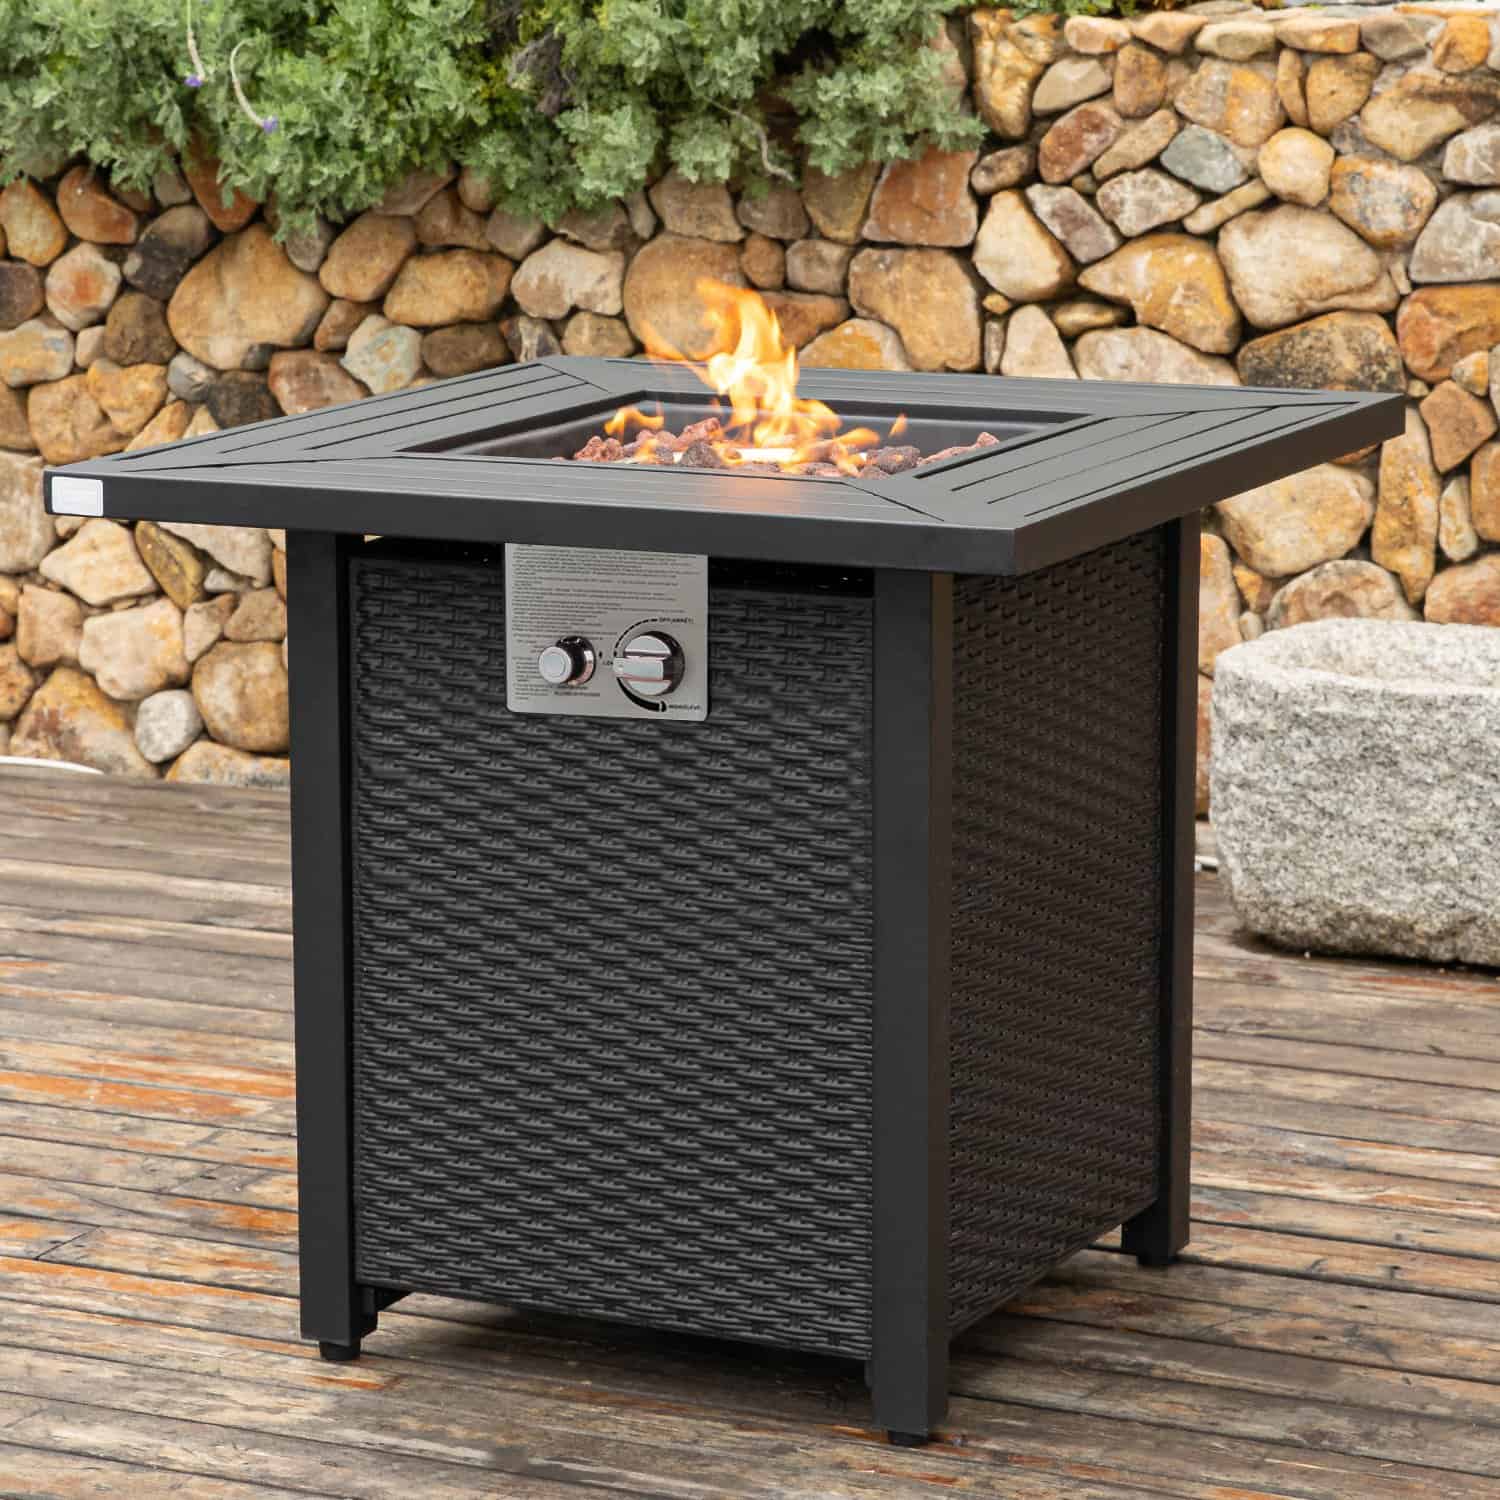 Eternity Square Iron Propane Fire Pit Table